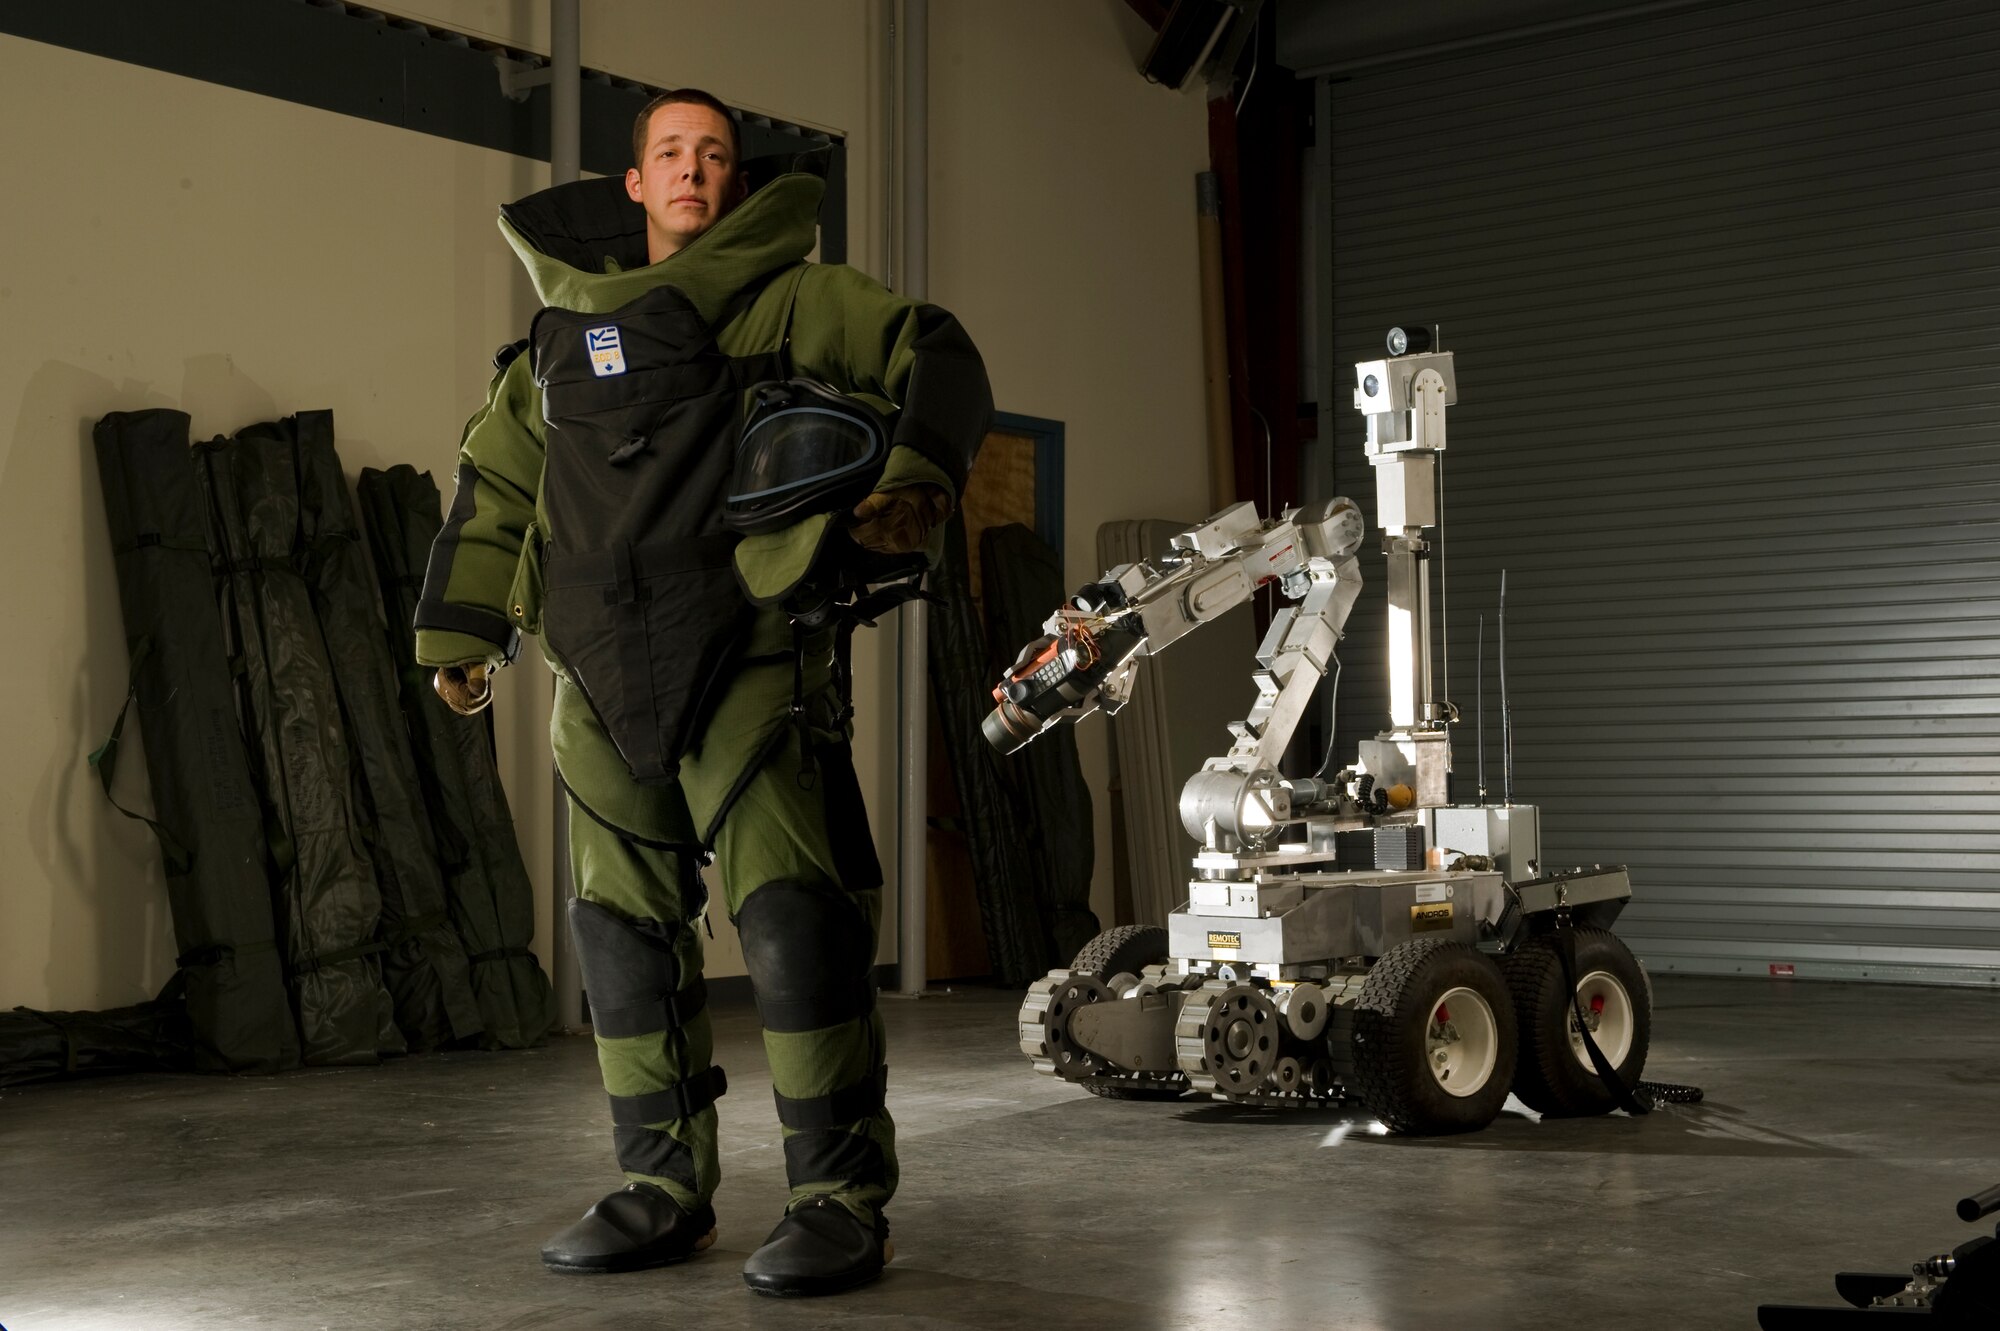 Stacy Pearsall photographed Staff Sgt. Ryan Dehlinger, a 315th Airlift Wing explosive ordinance disposal technician, wears his protective gear in front of a remotely operated EOD unit. (Courtesy Photo by Stacy Pearsall)